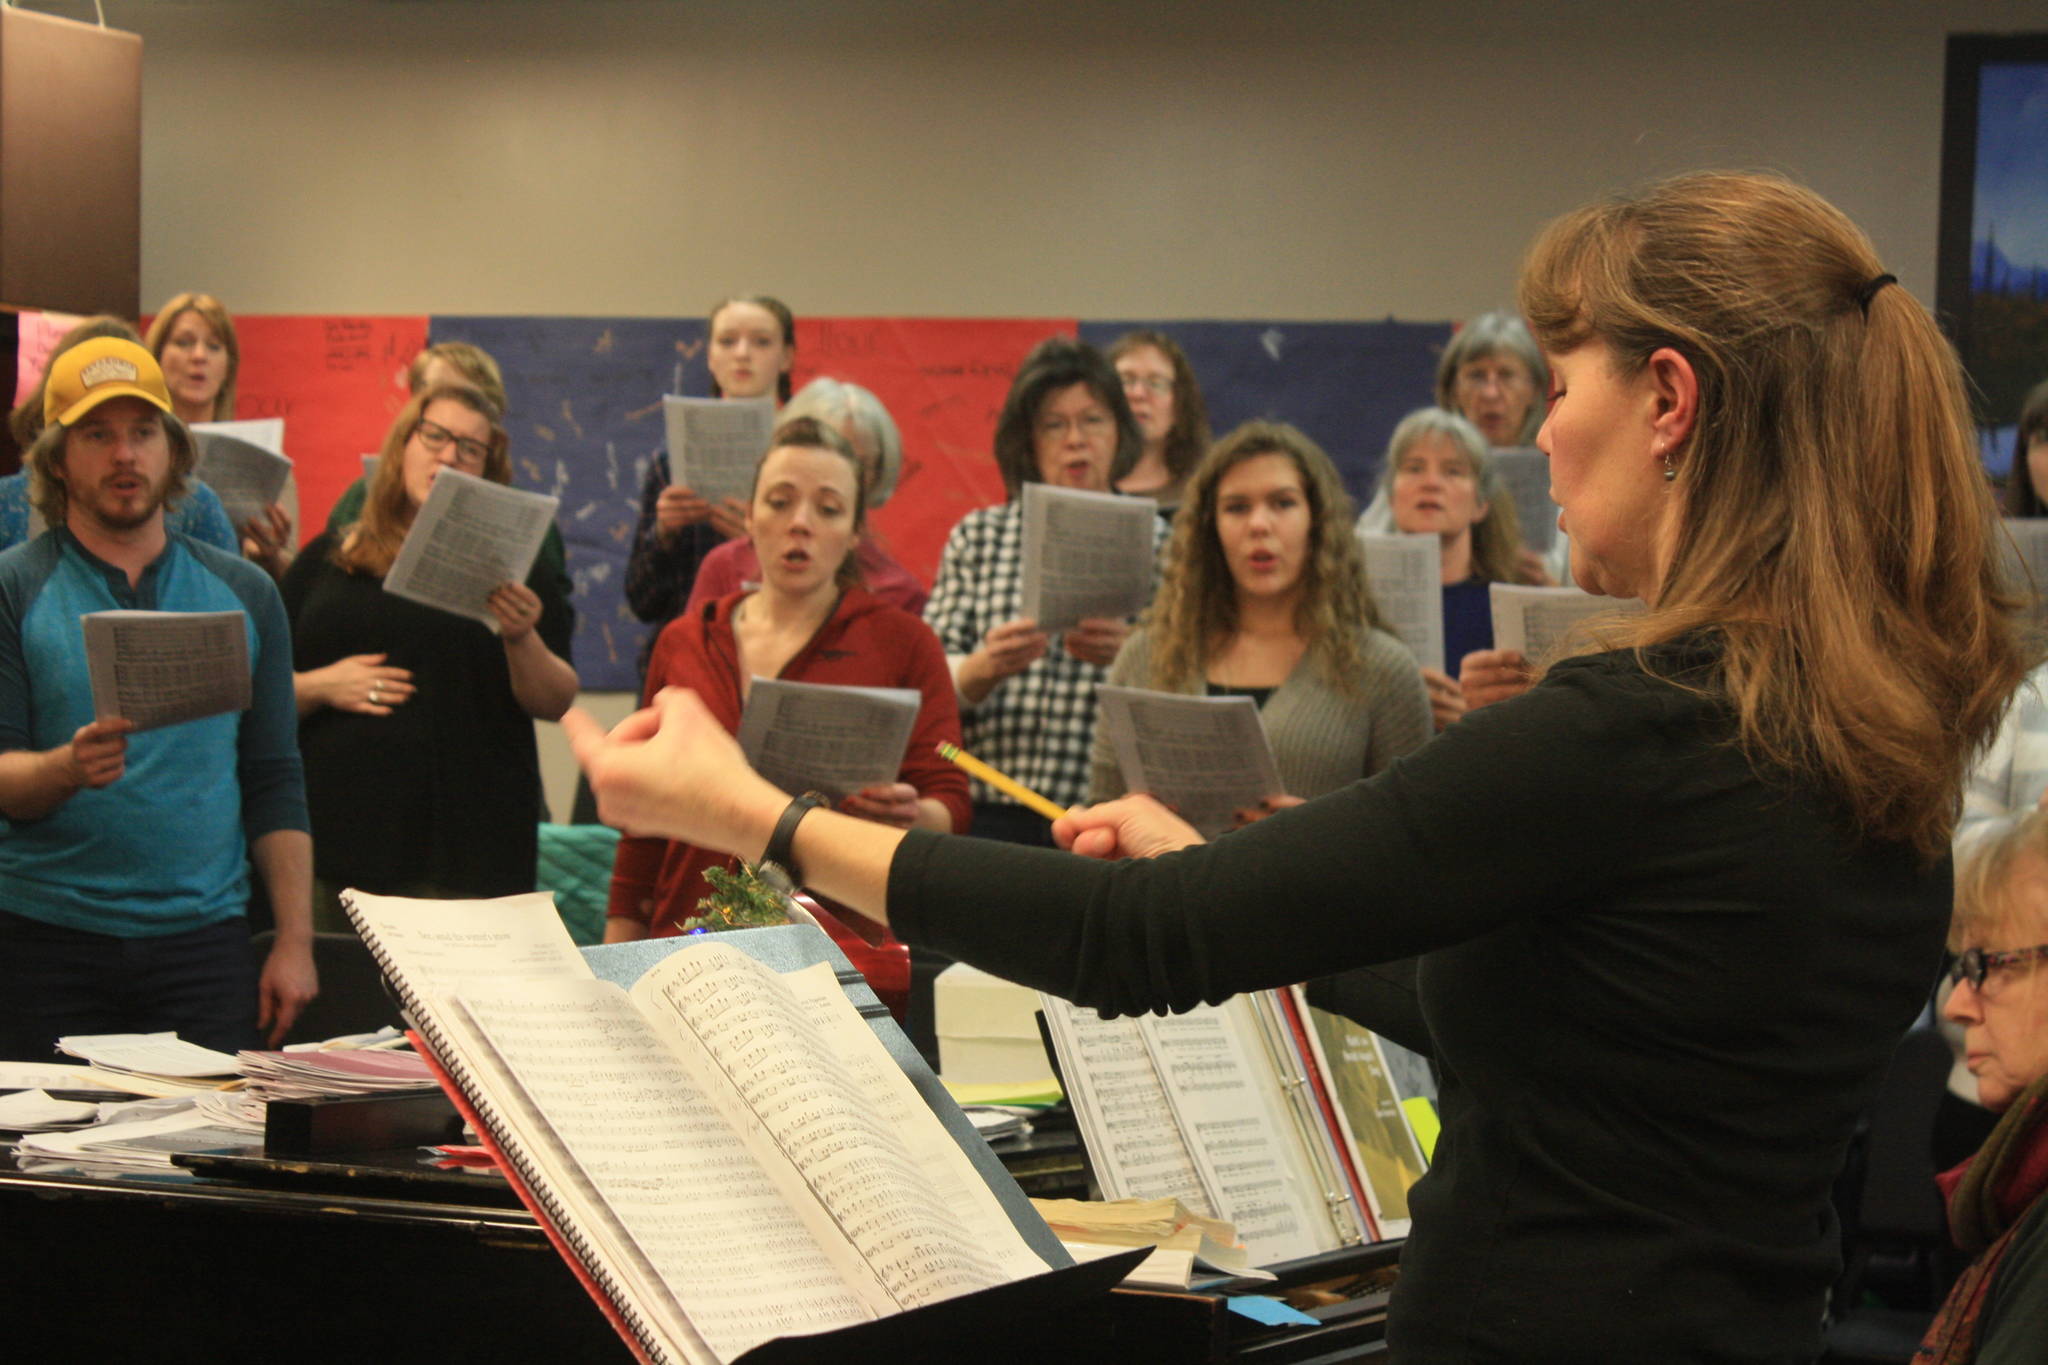 Redoubt Chamber Orchestra Conductor Tammy Vollom-Matturro leads the Kenai Peninsula Singers during a rehearsal on Dec. 11. The choir and orchestra will perform together in the 2017 Evening of Christmas on Friday, Dec. 15. (Photo by Erin Thompson/Peninsula Clarion)